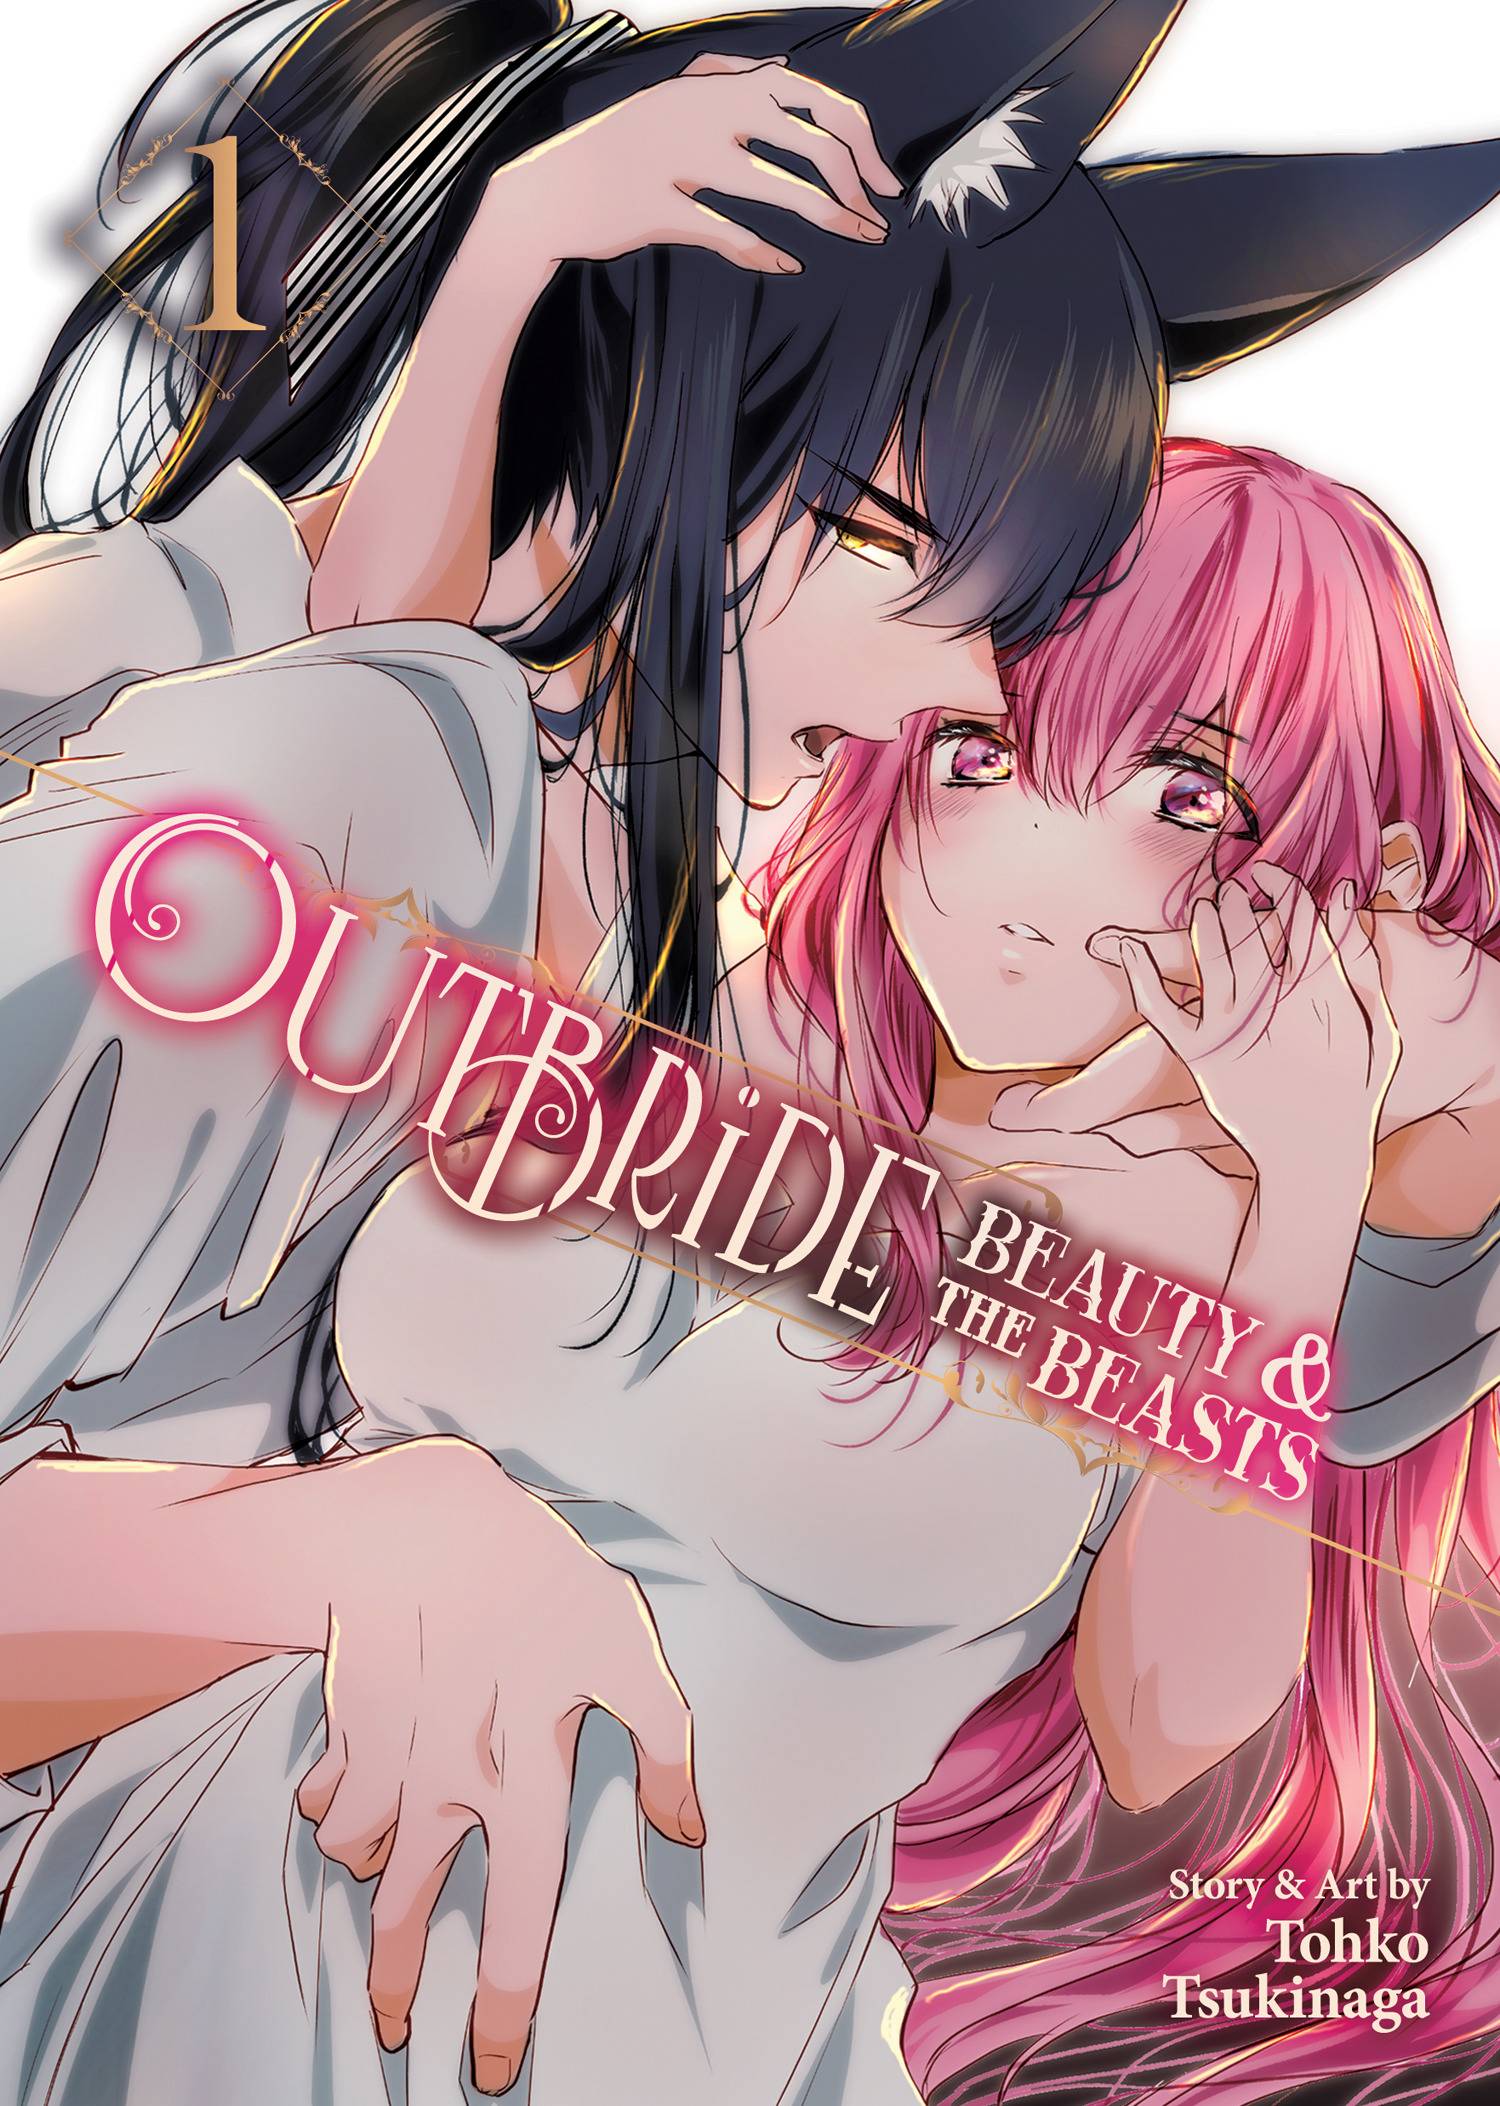 OUTBRIDE BEAUTY & BEASTS GN VOL 01